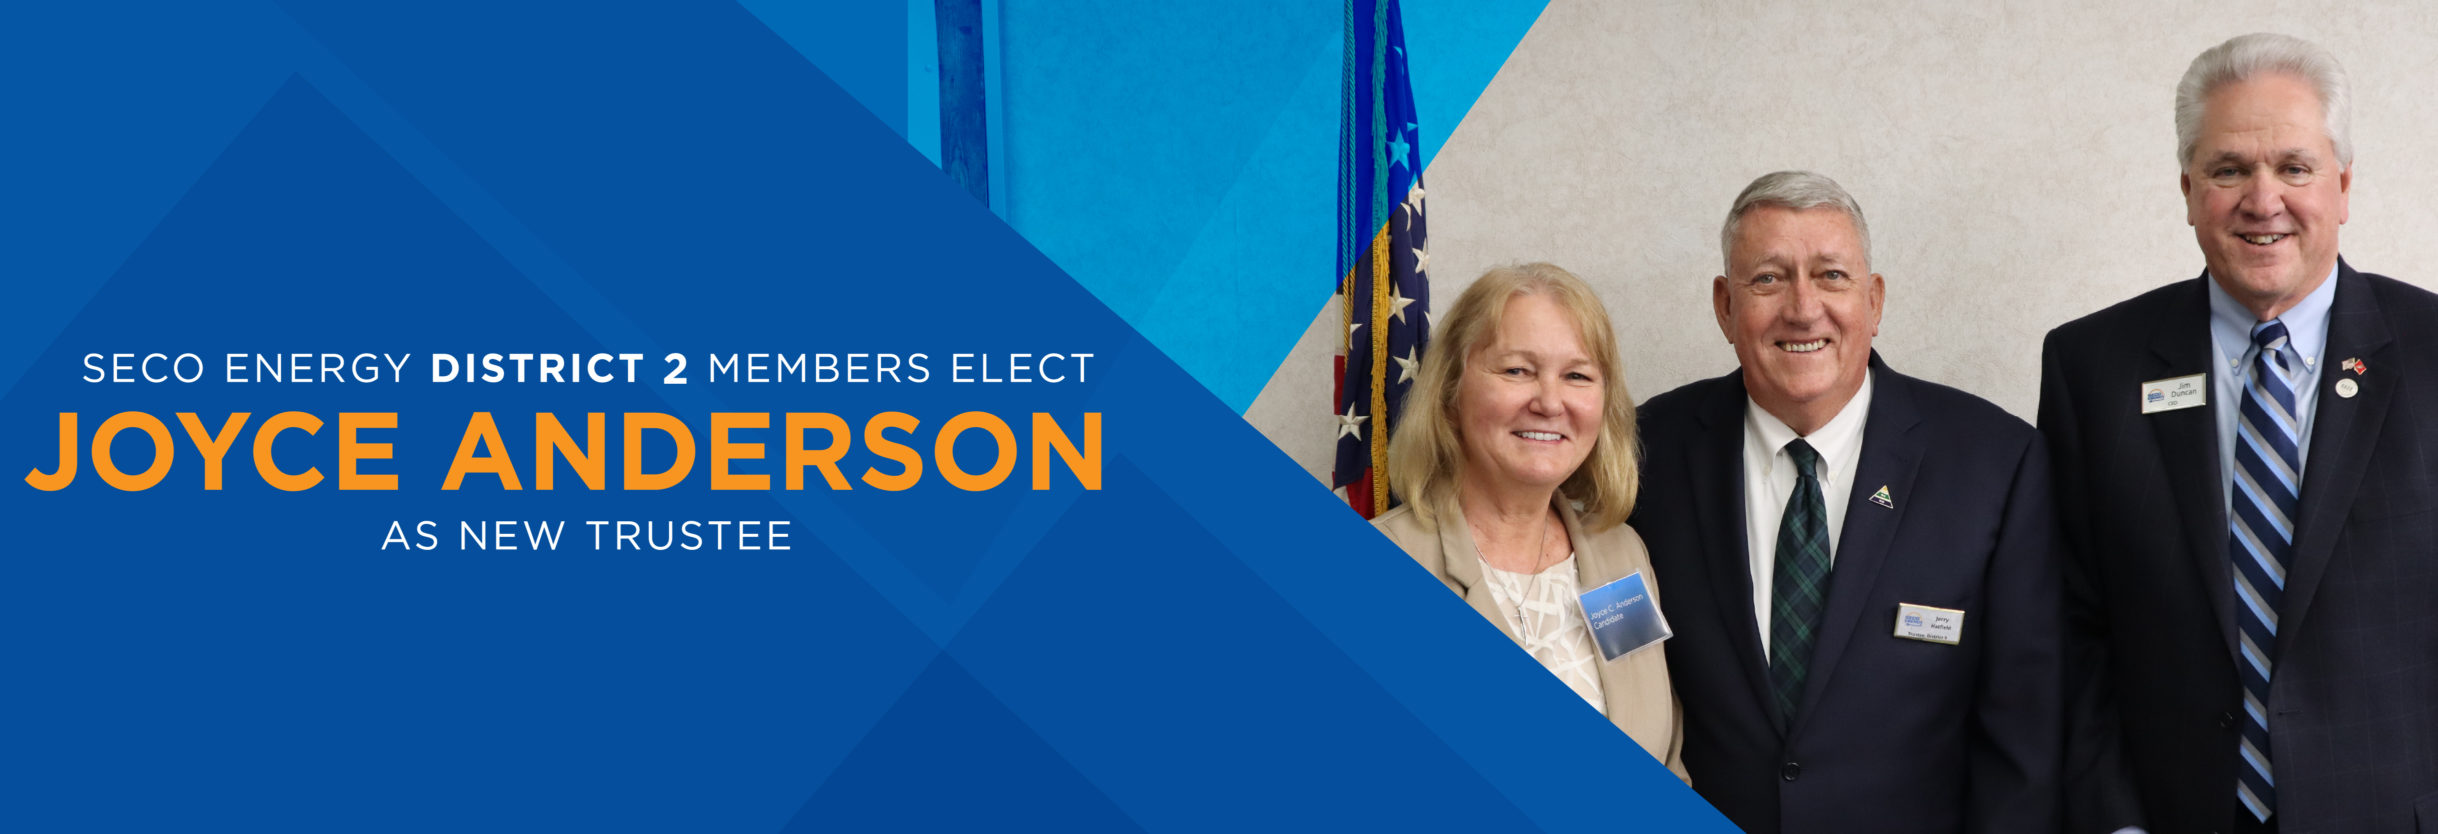 SECO Energy District 2 Members Elect Joyce Anderson as New Trustee